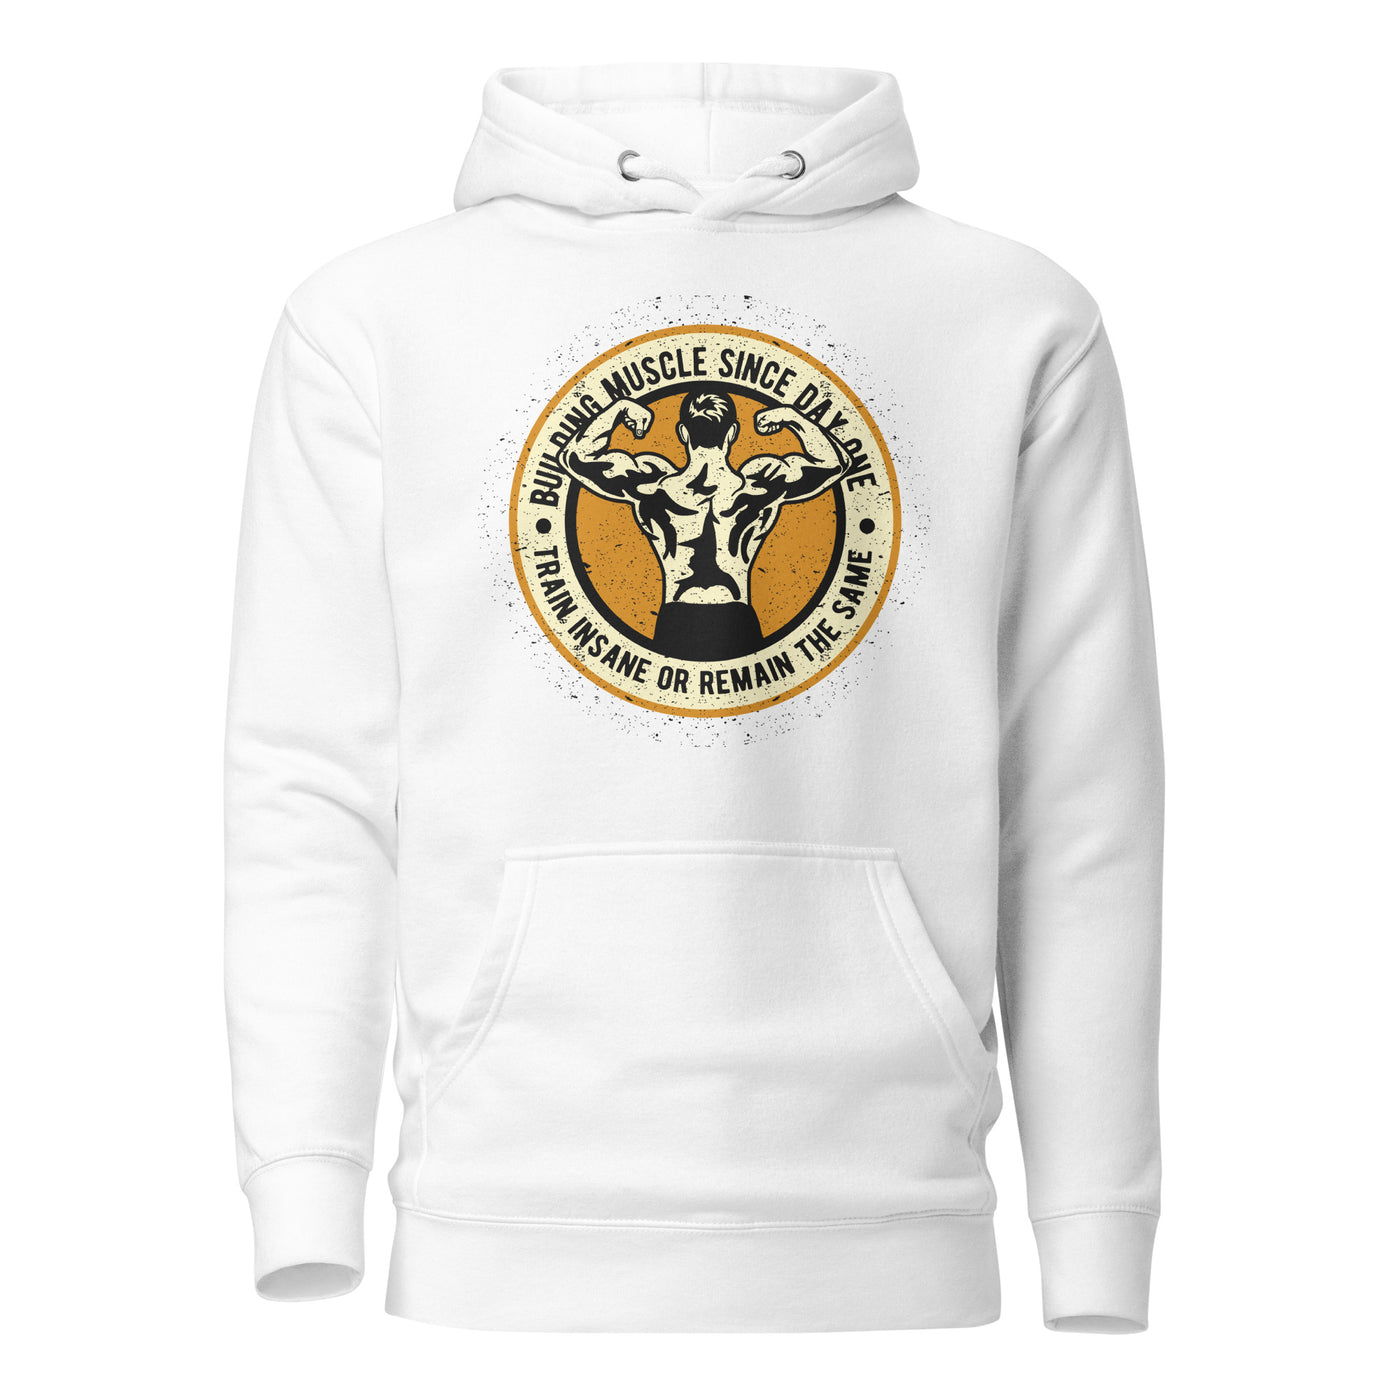 Building muscles since Day one - Unisex Hoodie